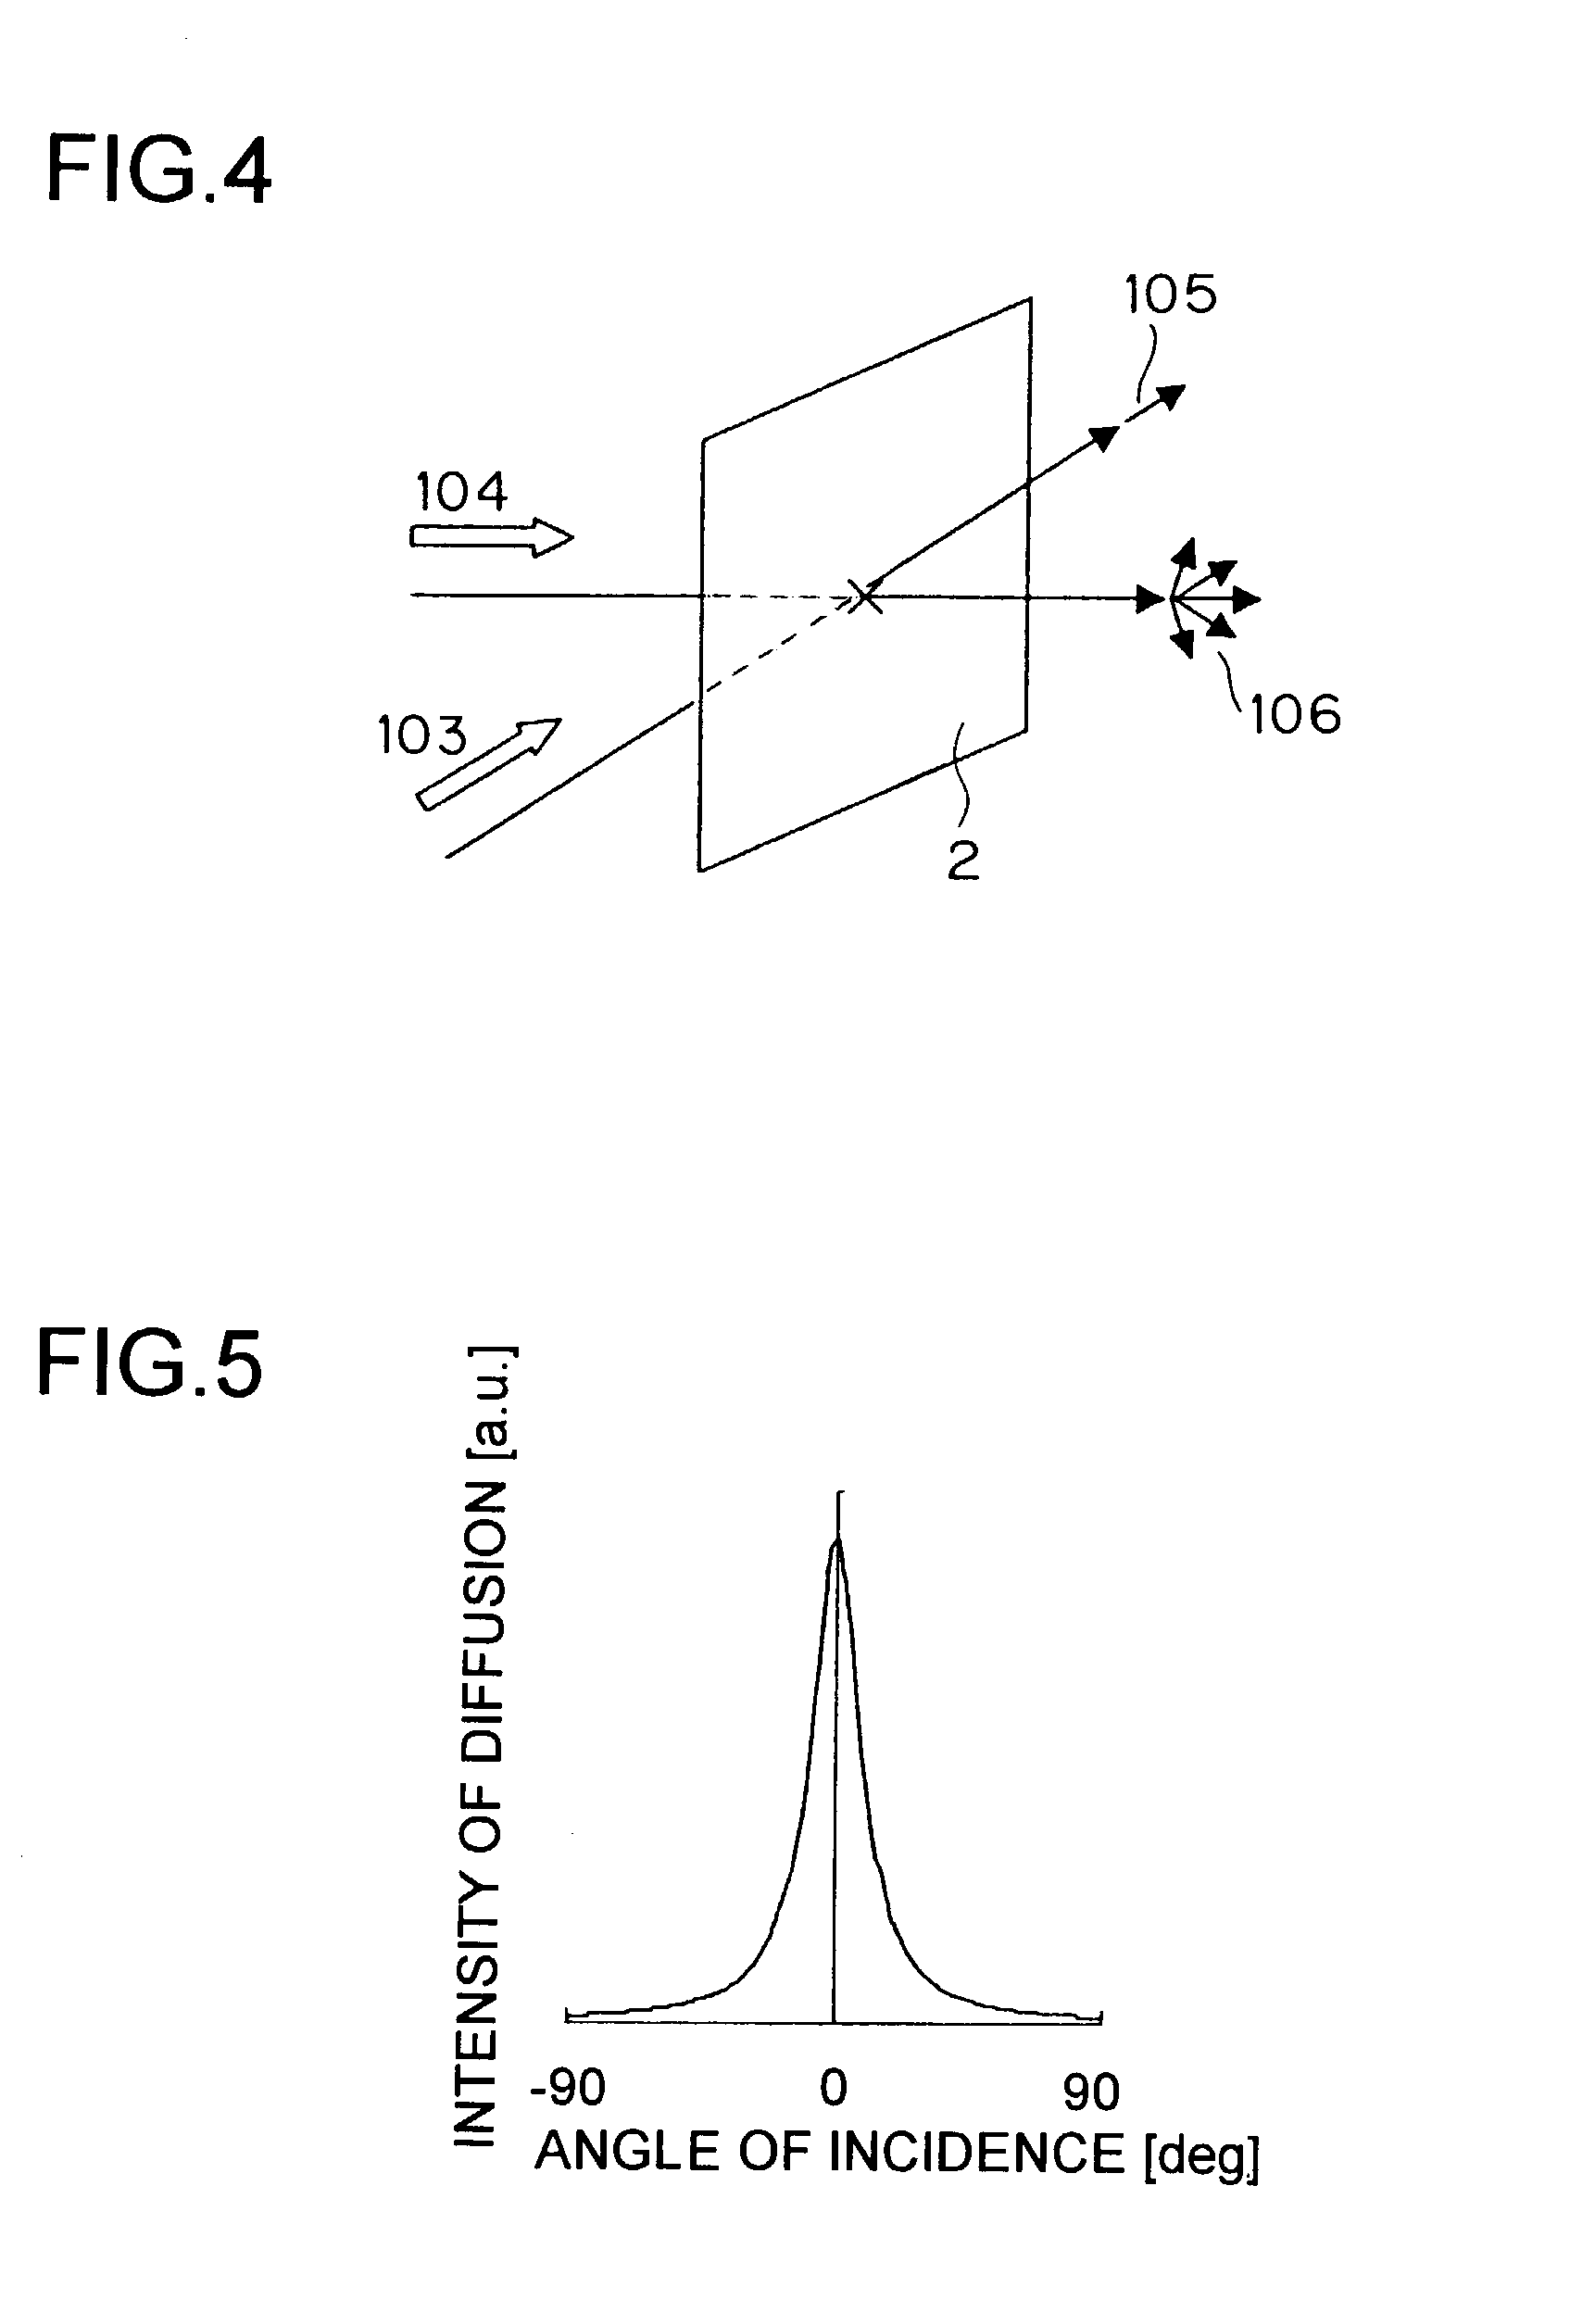 Antiglare film, method for fabricating the same, polarizer element and display device employing the same, and internal diffusion film